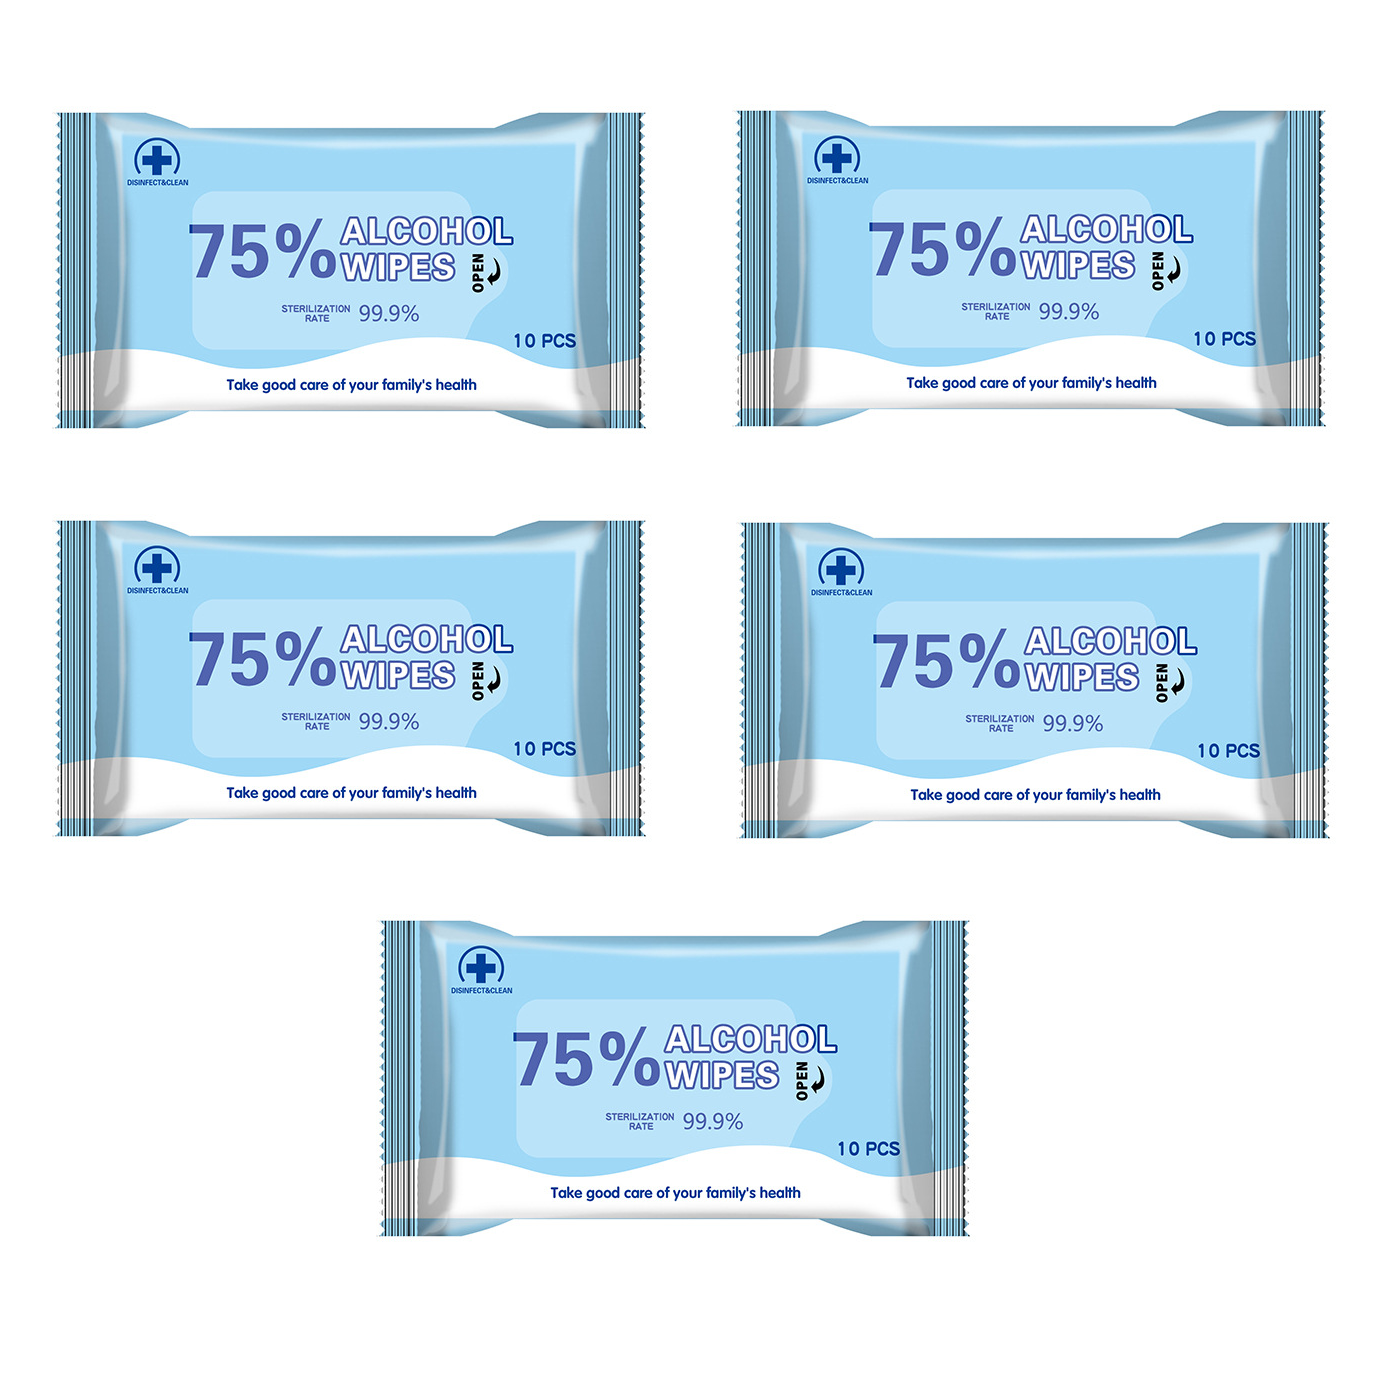 XINQING 5 Packs Of 10Pcs 75% Medical Alcohol Wipes 99.9% Antibacterial Disinfection Cleaning Wet Wipes Disposable Wipes for Cleaning and Sterilization in Office Home School Swab